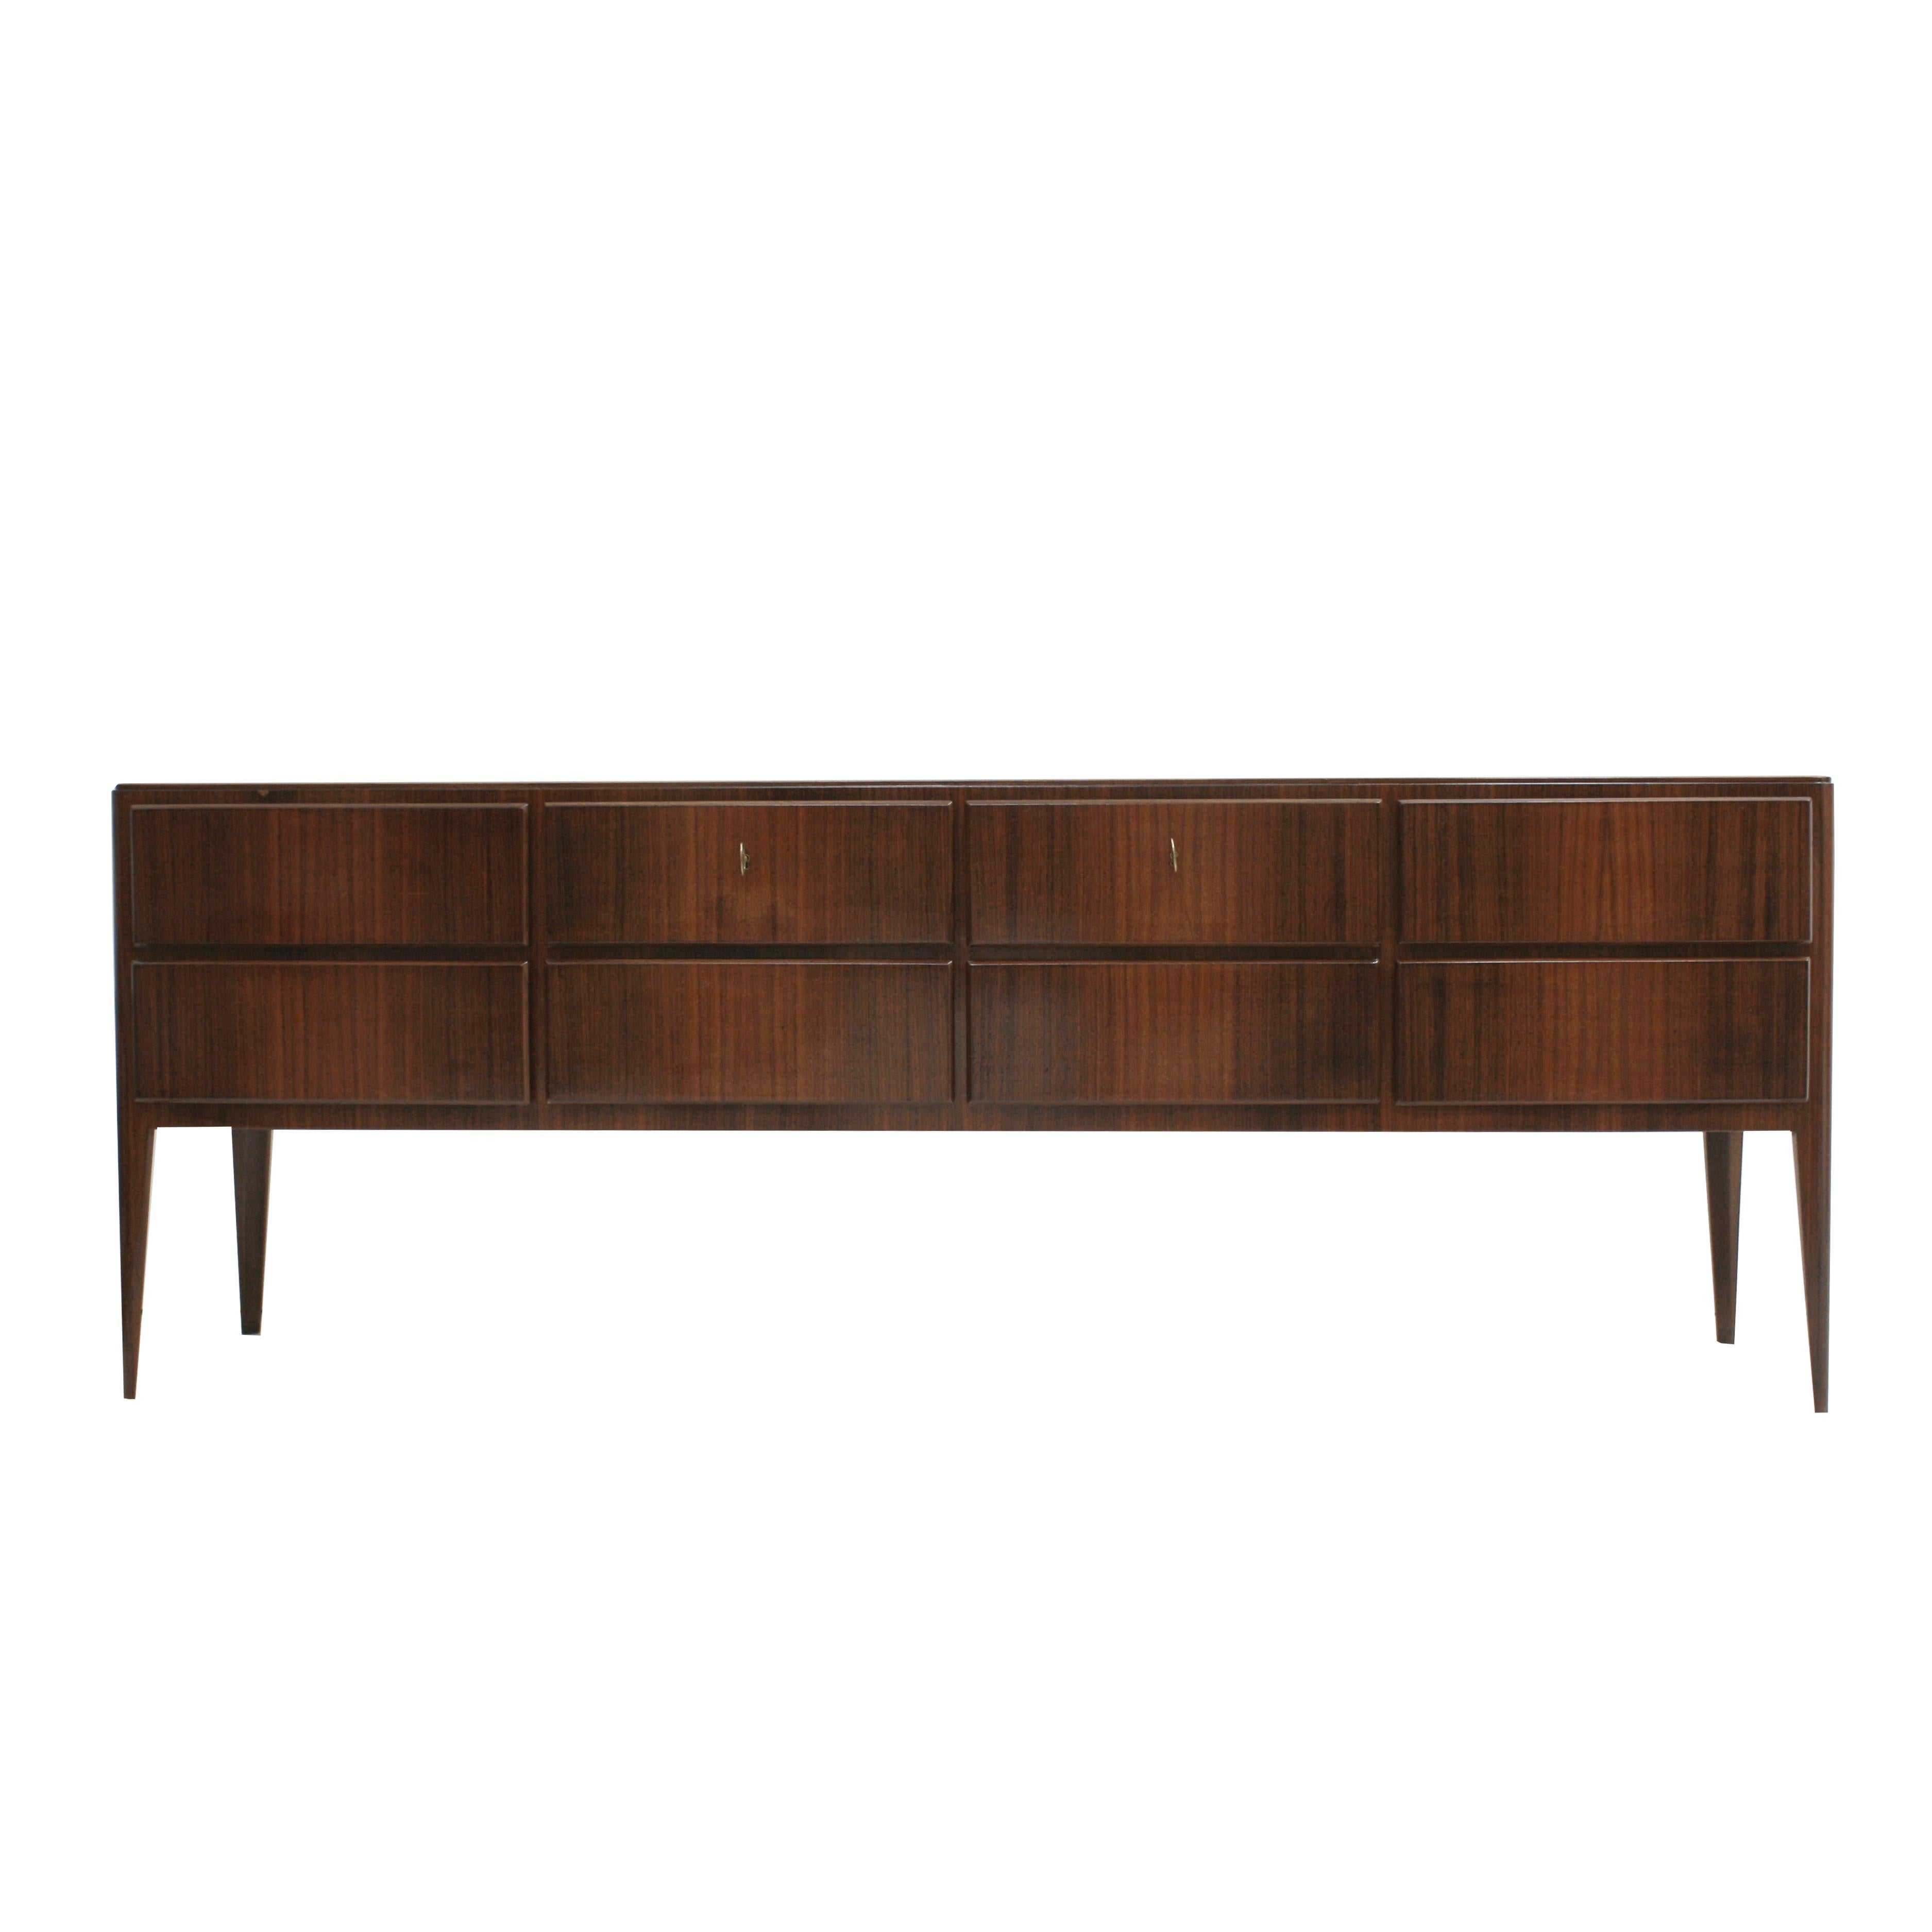 1950s Italian sideboard composed of eight drawers and four legs made of solid wood structure covered in rosewood and rose onyx marble-top.

Our main target is customer satisfaction, so we include in the price for this item professional and